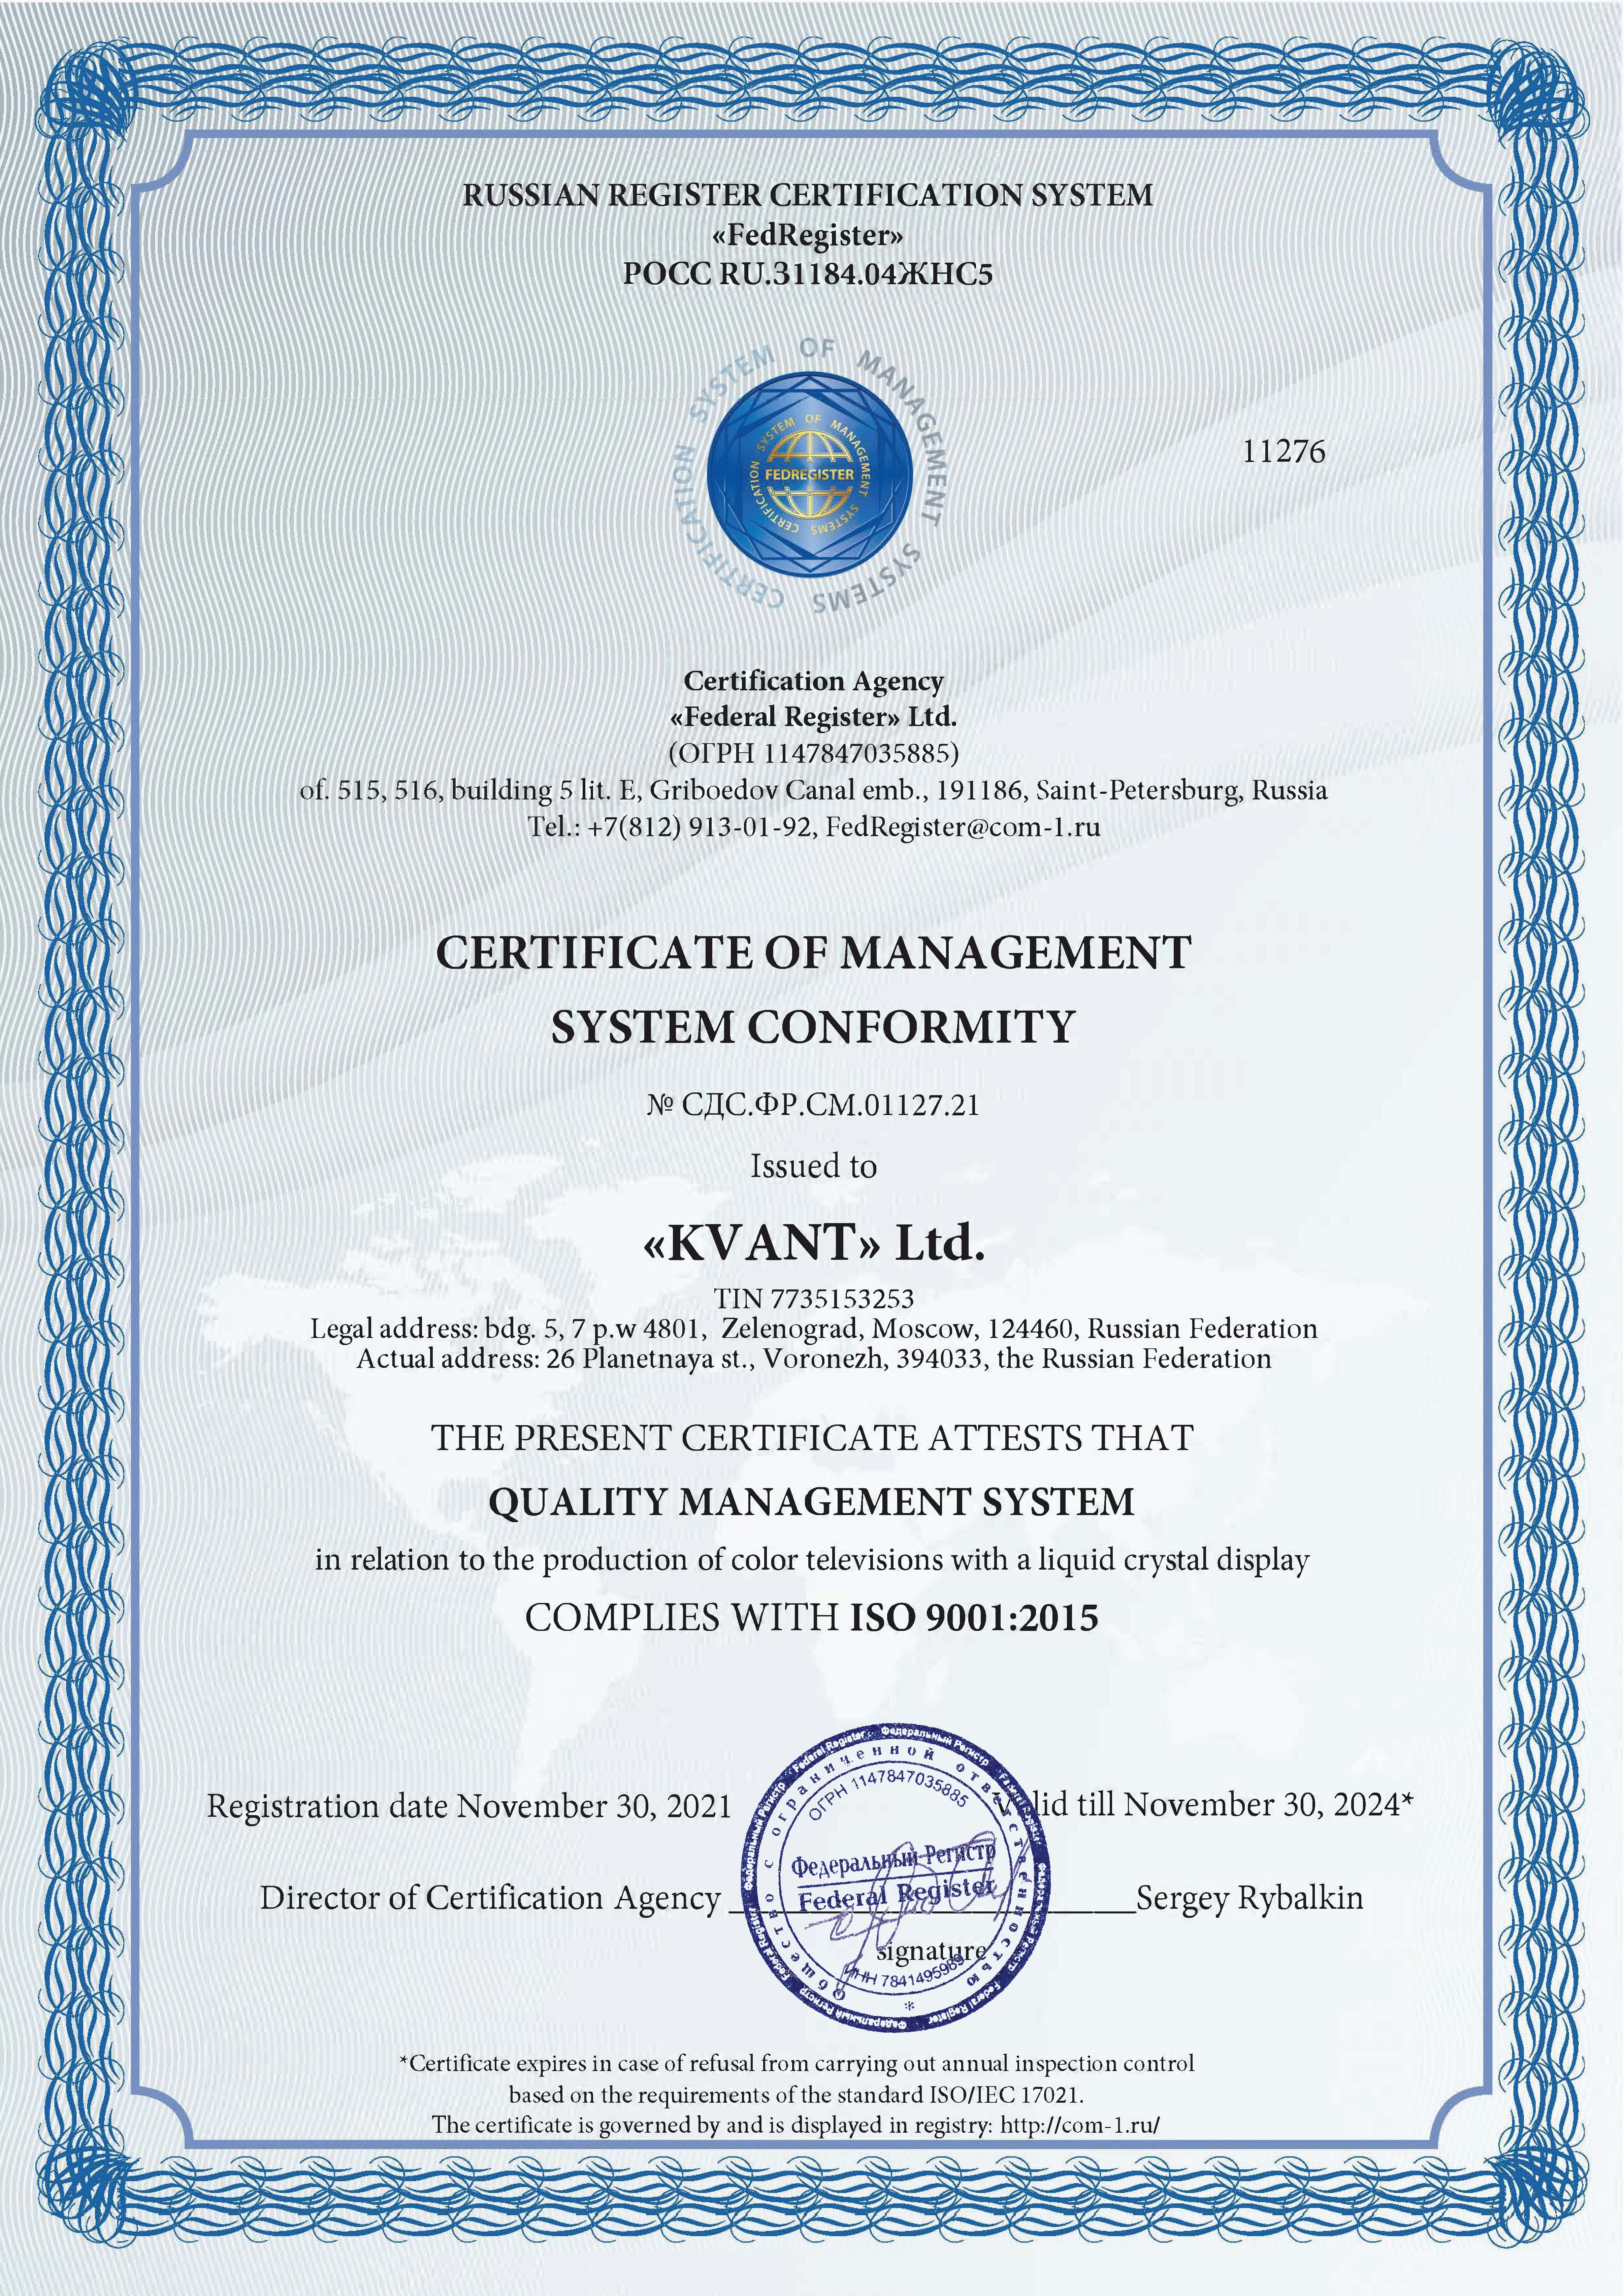 Certificate of management system conformity